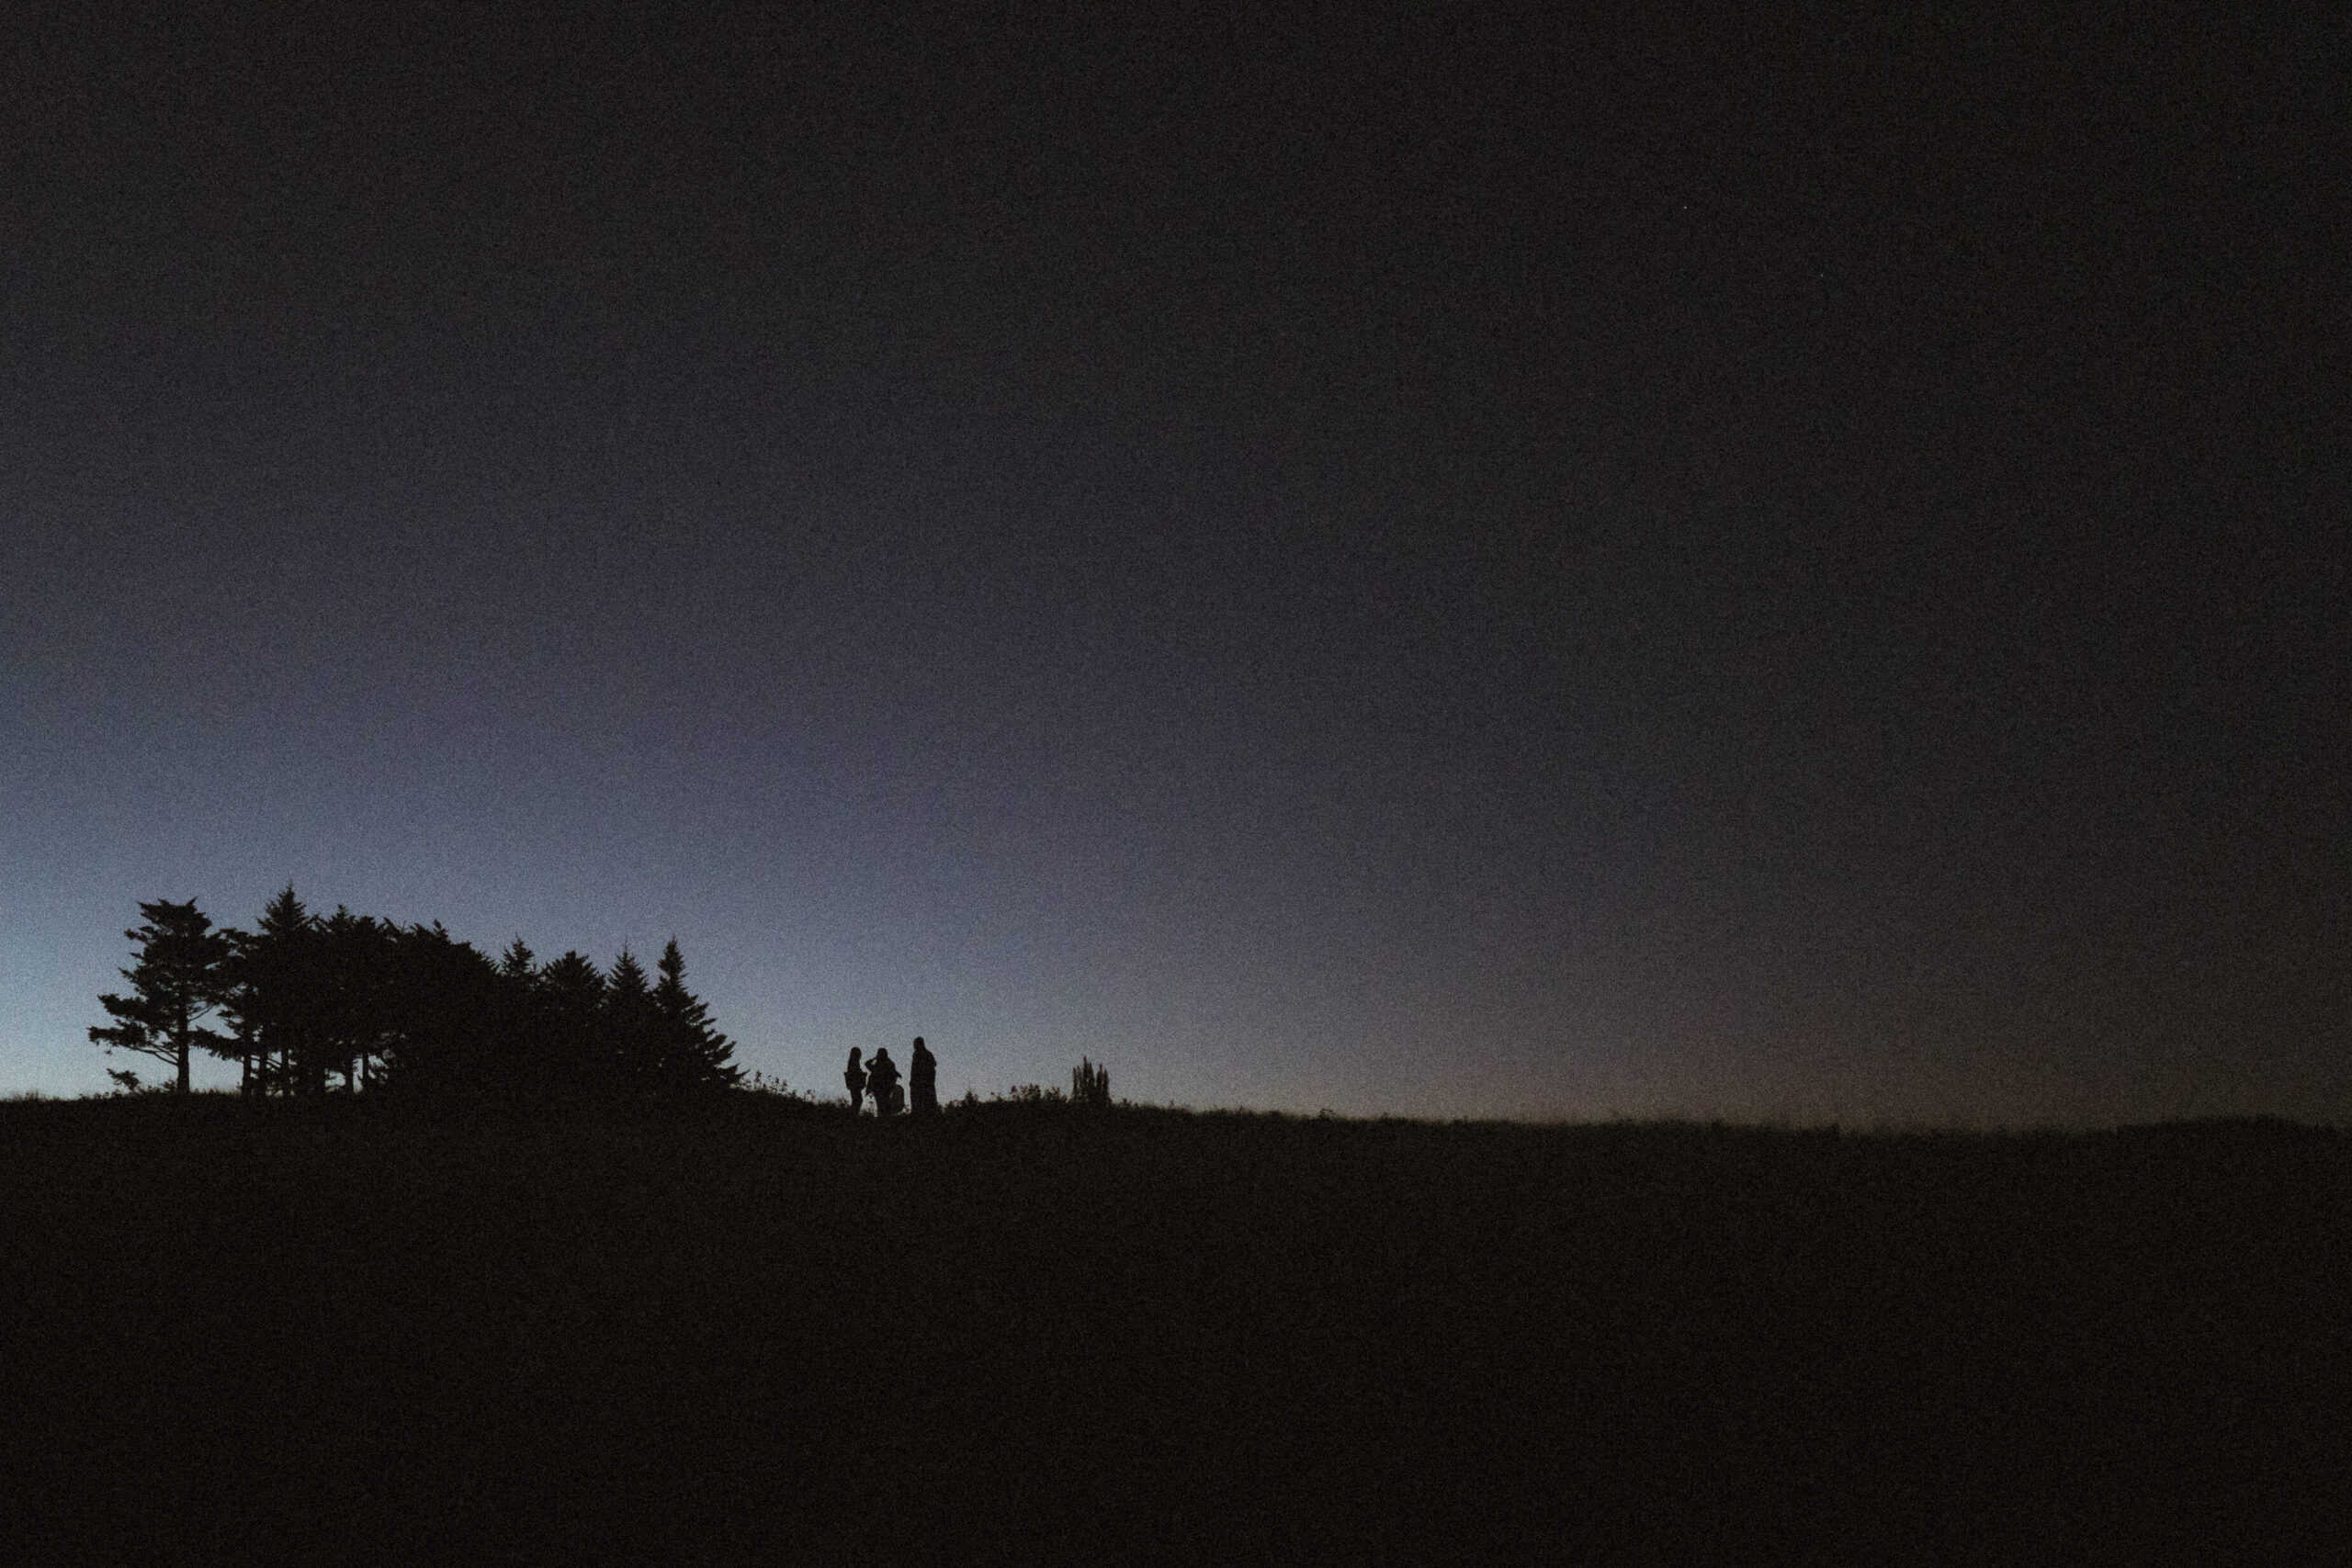 Four people standing in the darkness on a mountaintop waiting for the couple's sunrise mountain hiking elopement